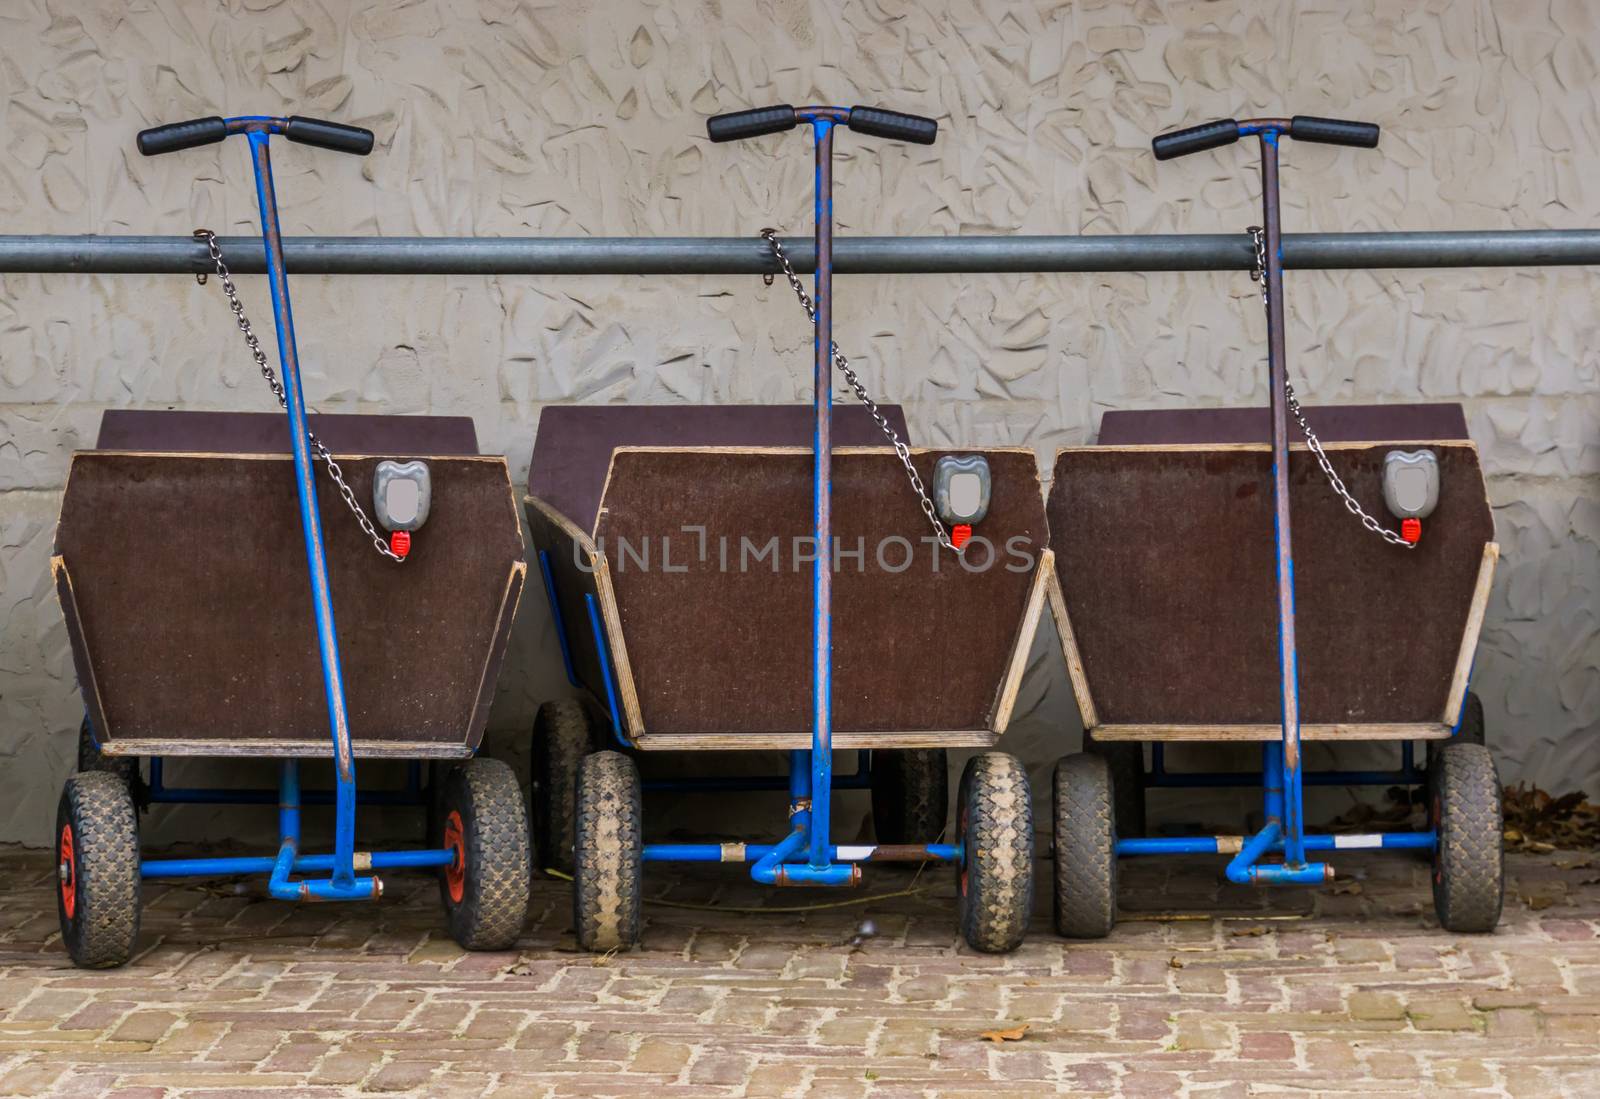 a row of pulling carts for baggage and children, locked and leashed on a metal bar, outdoor transportation